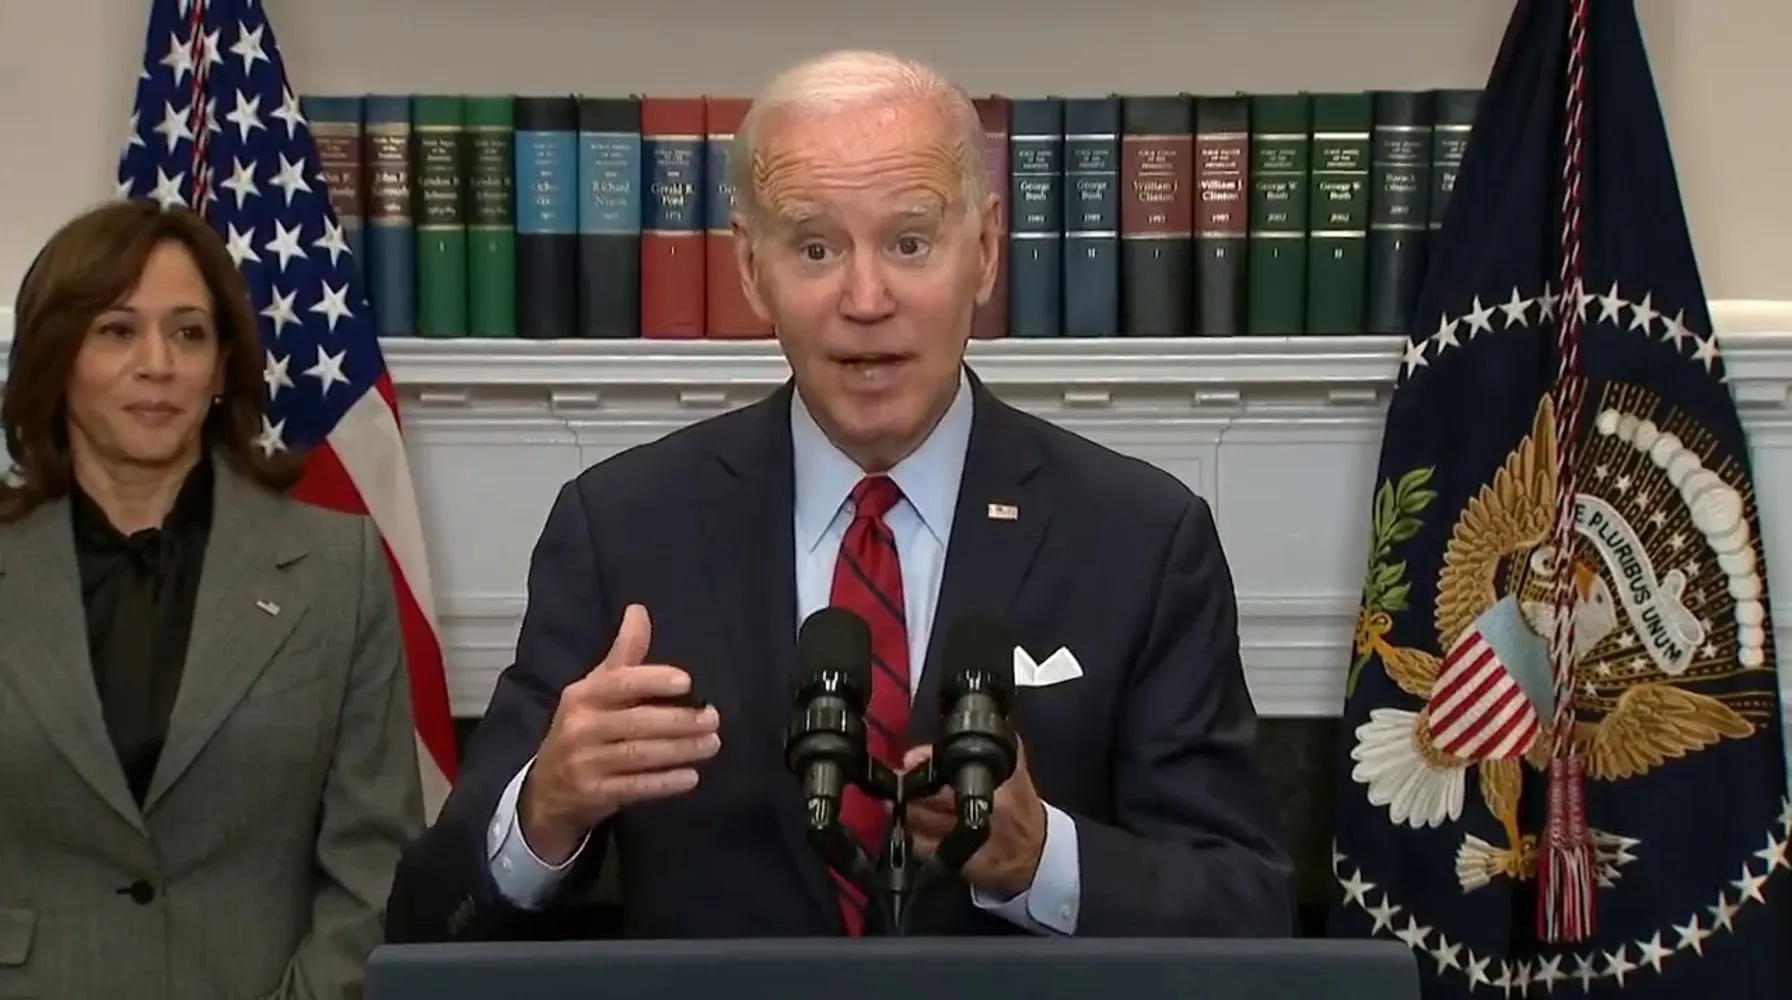 Biden fumbles during speech, appears not to know Title 8